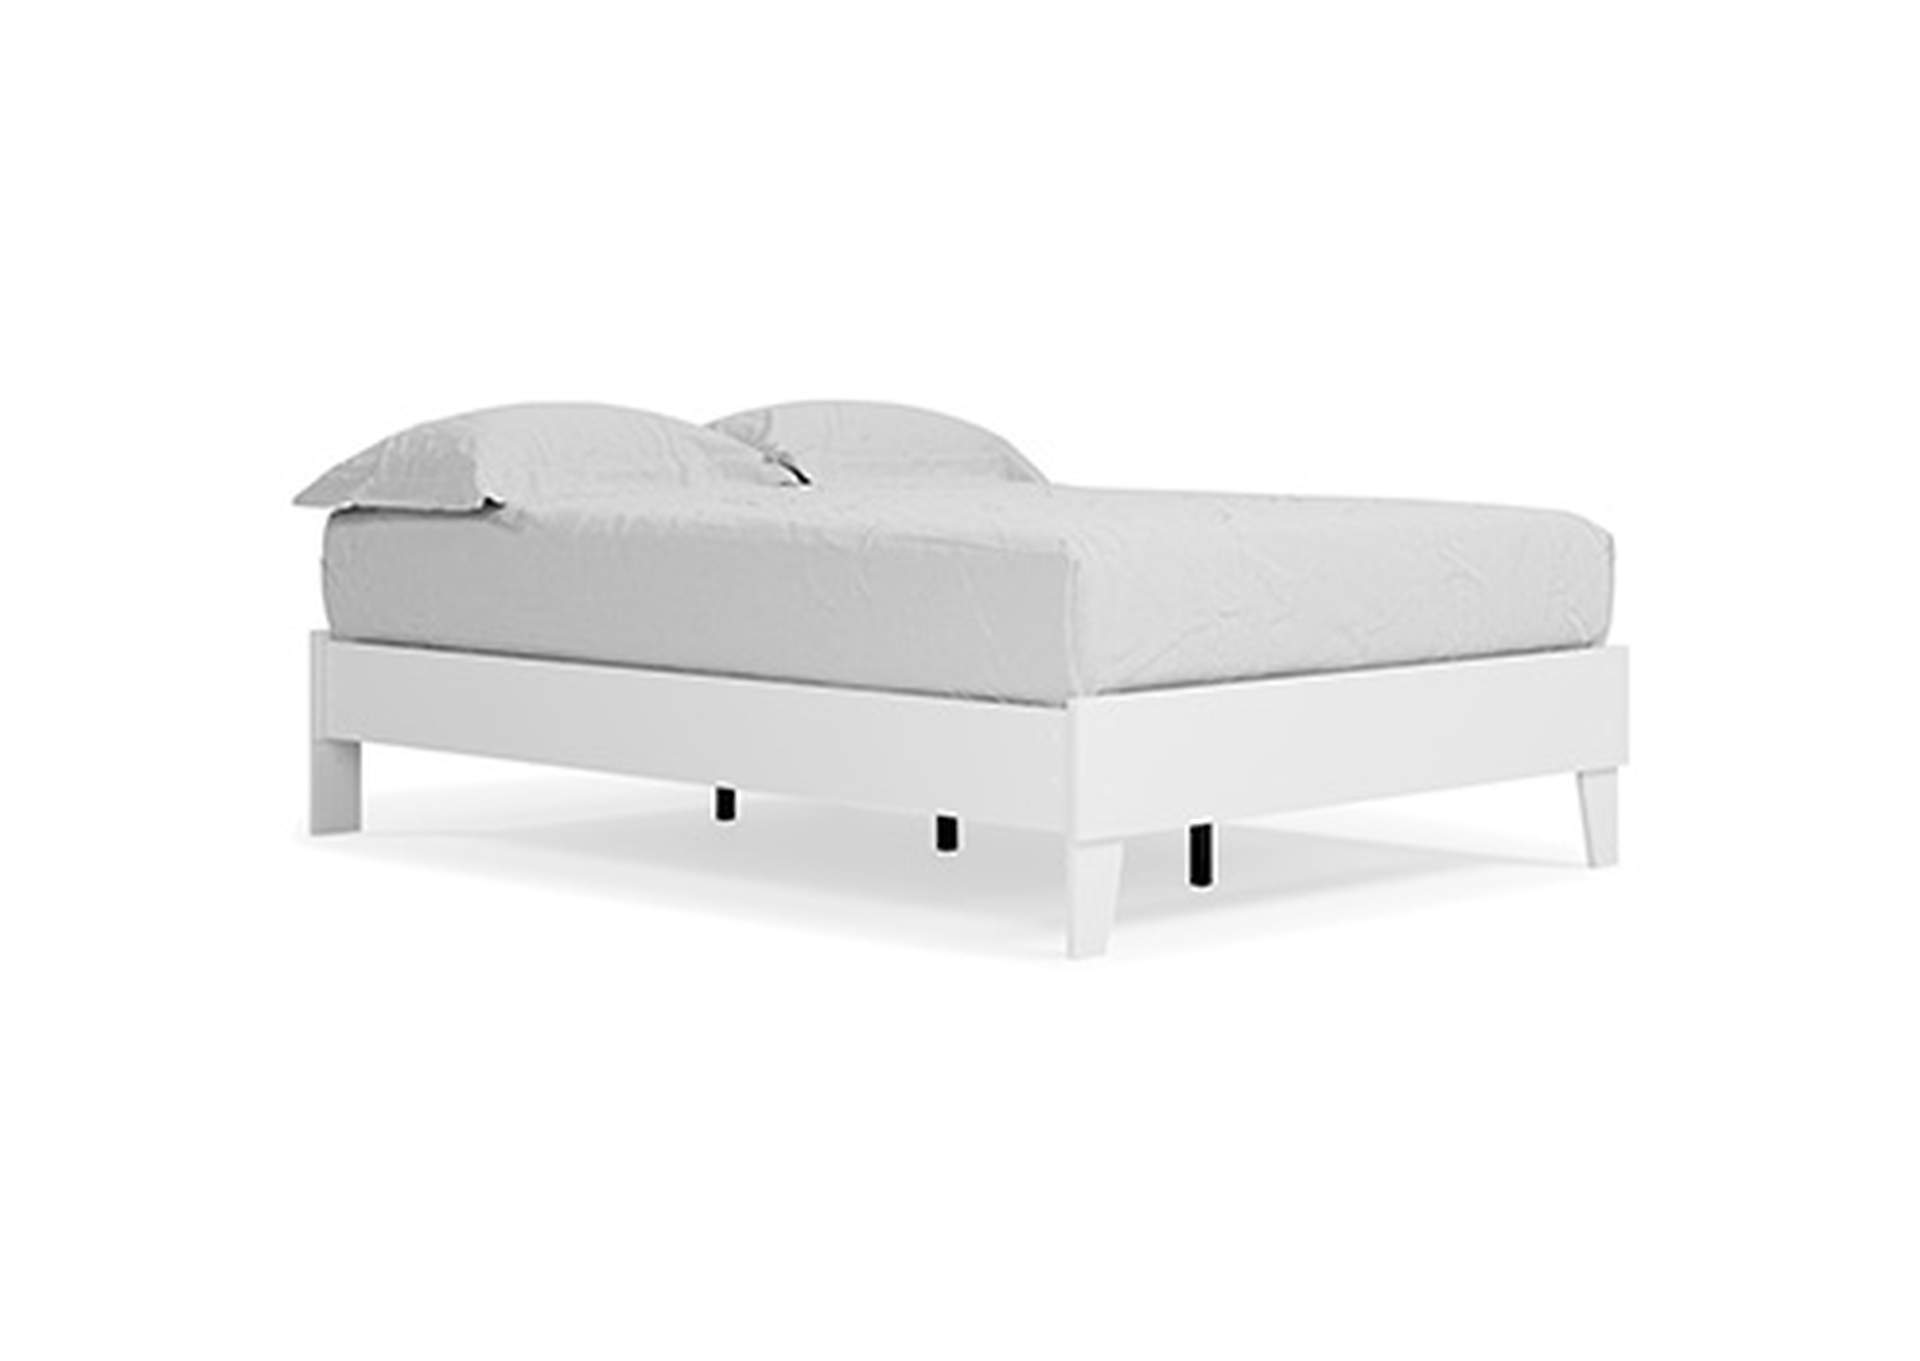 Piperton Full Platform Bed,Signature Design By Ashley